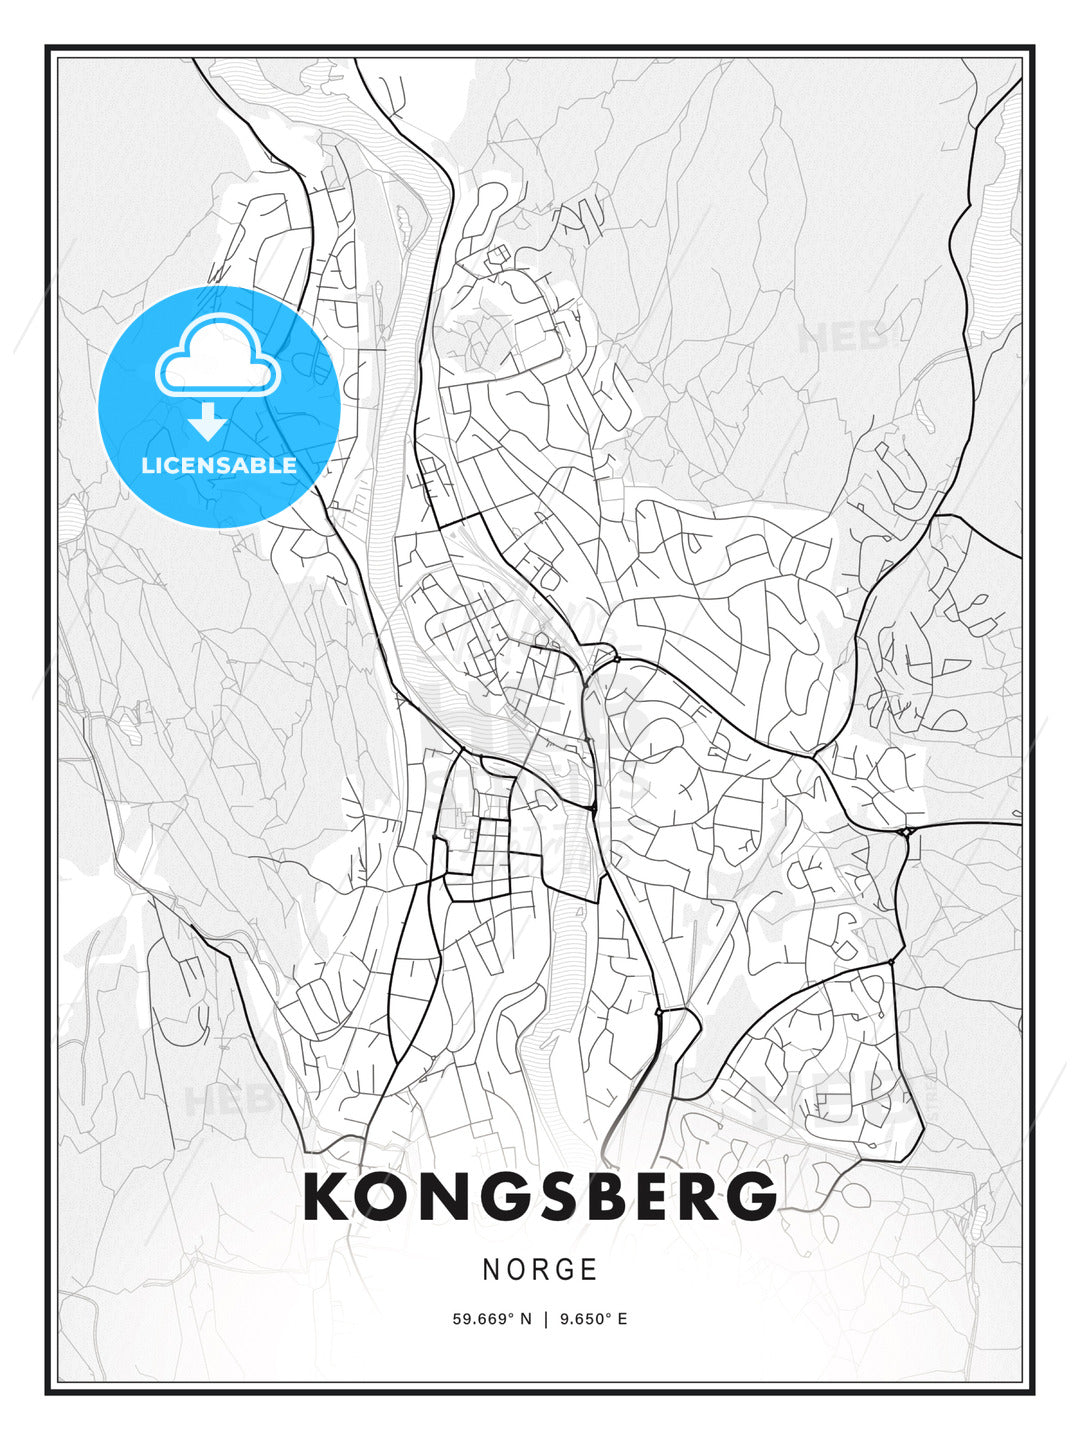 Kongsberg, Norway, Modern Print Template in Various Formats - HEBSTREITS Sketches